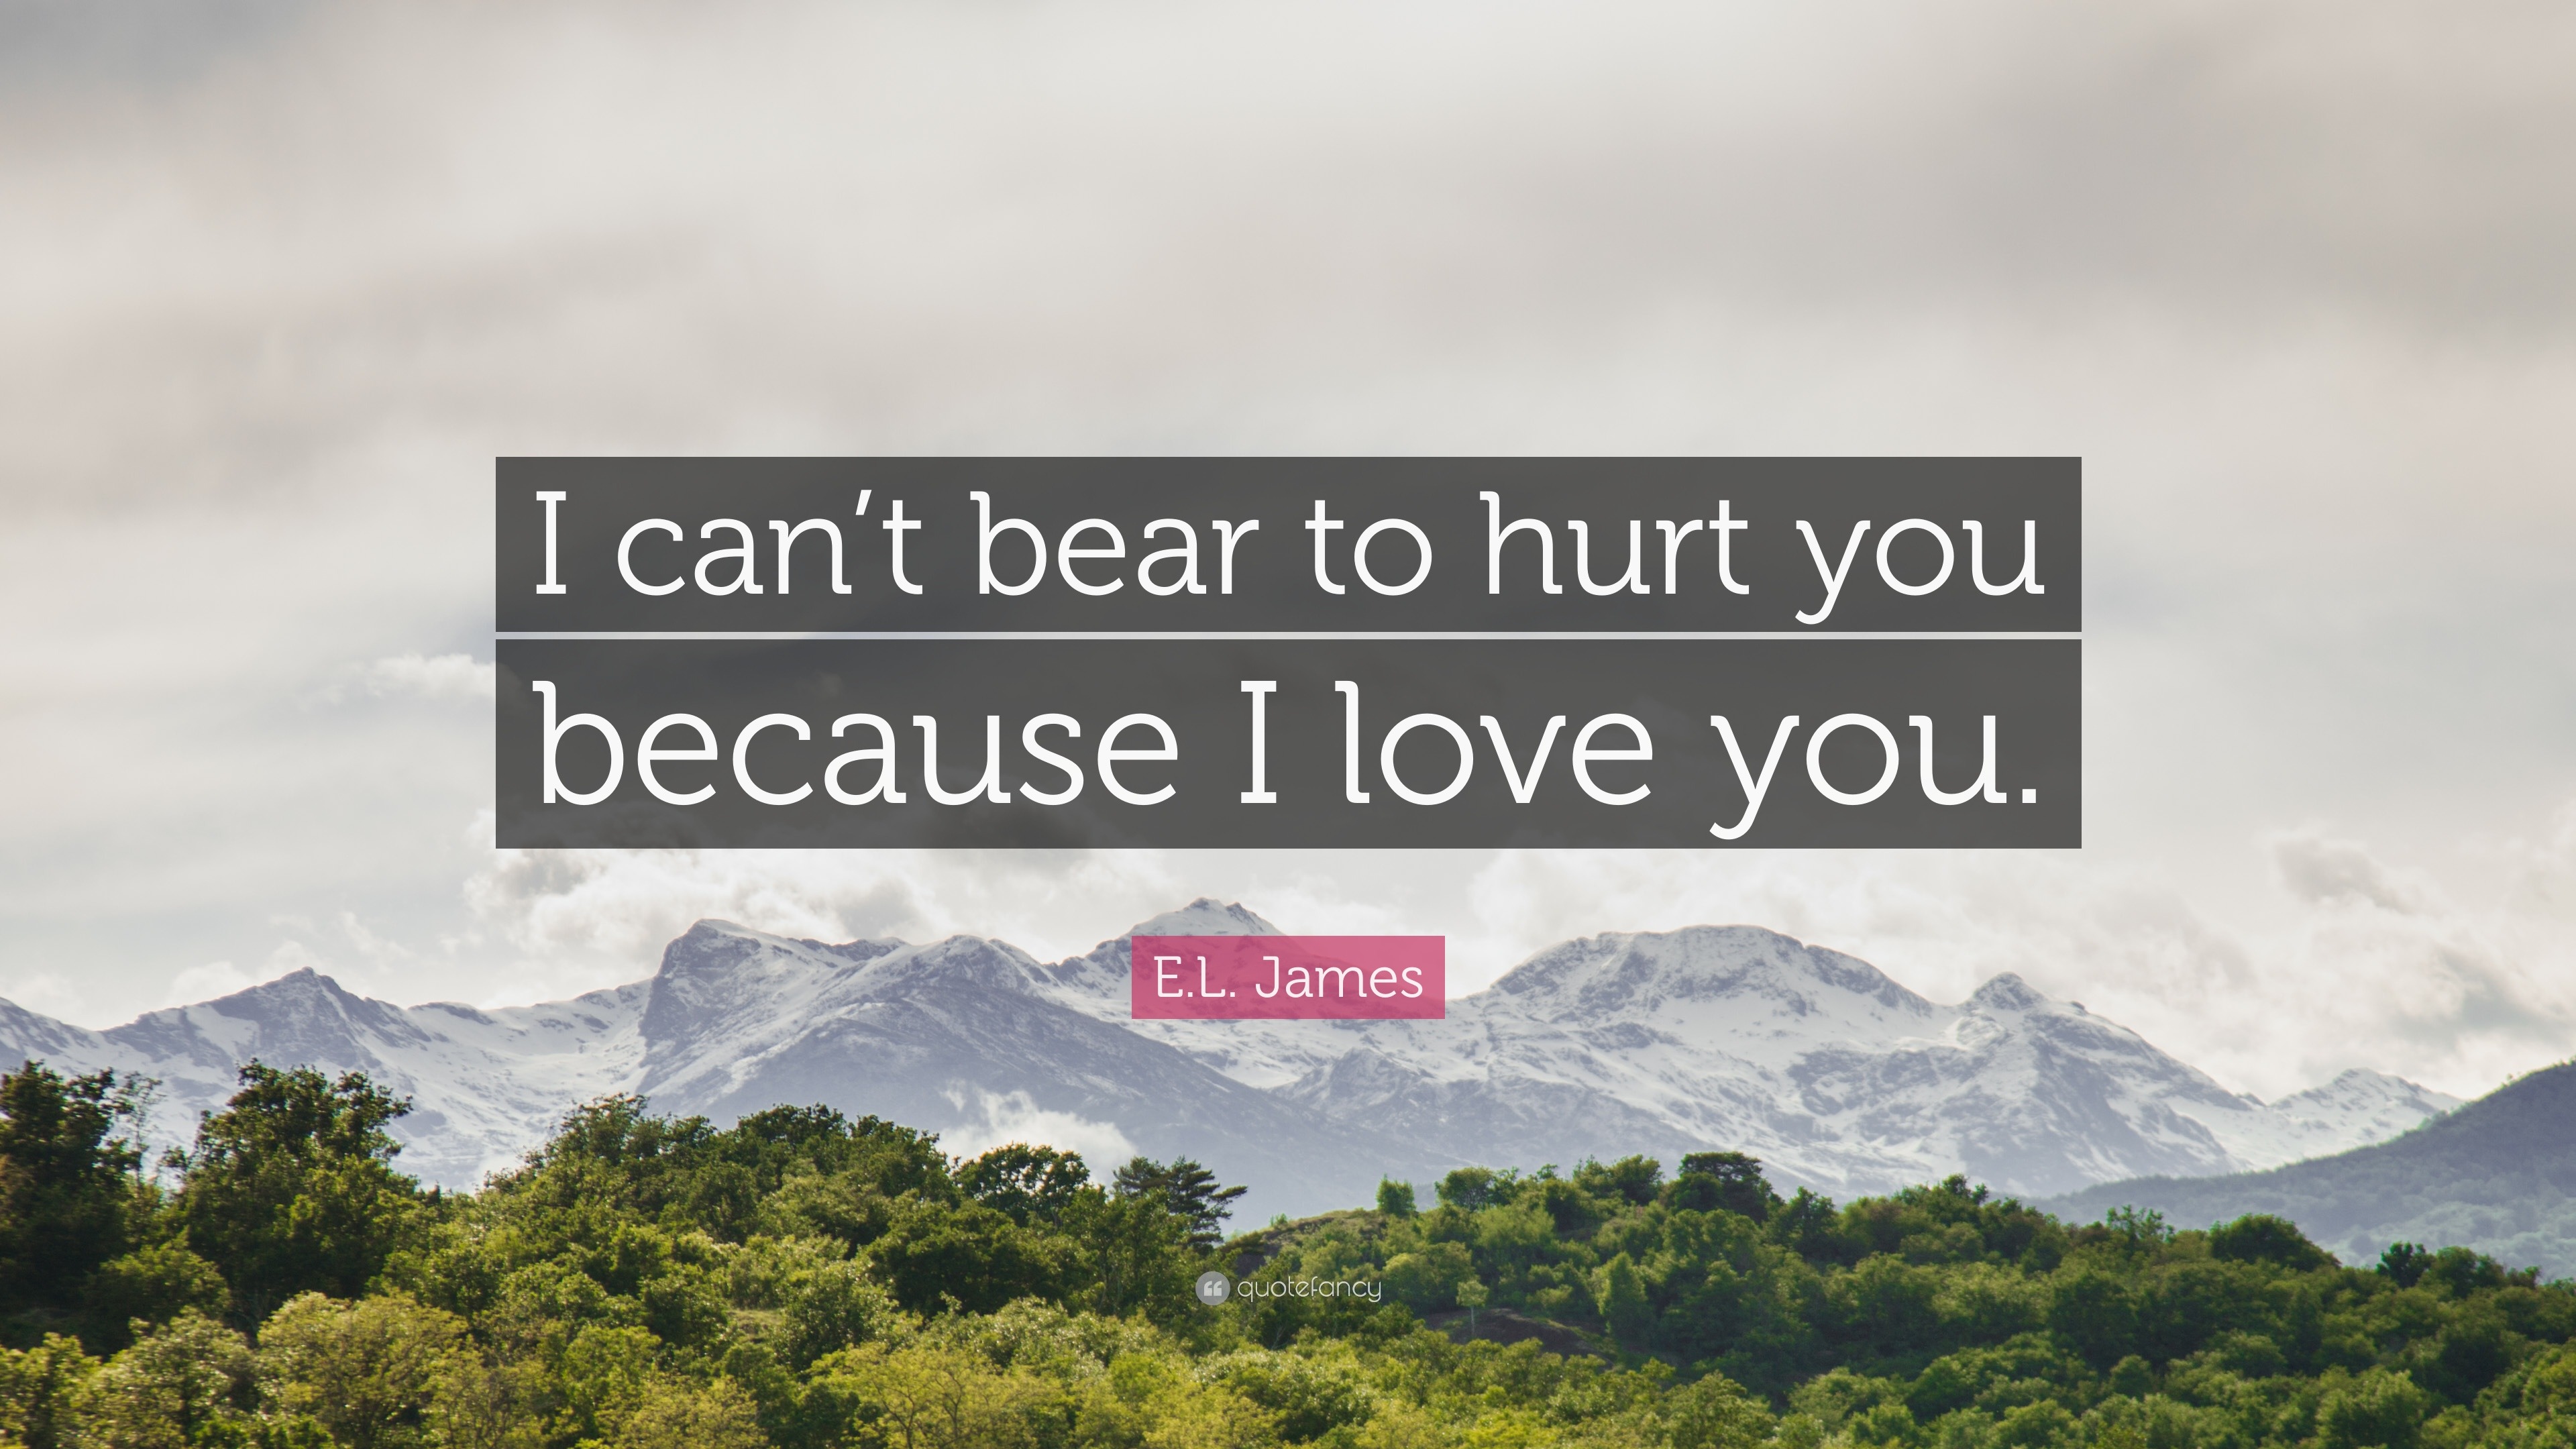 E L James Quote “I can t bear to hurt you because I love